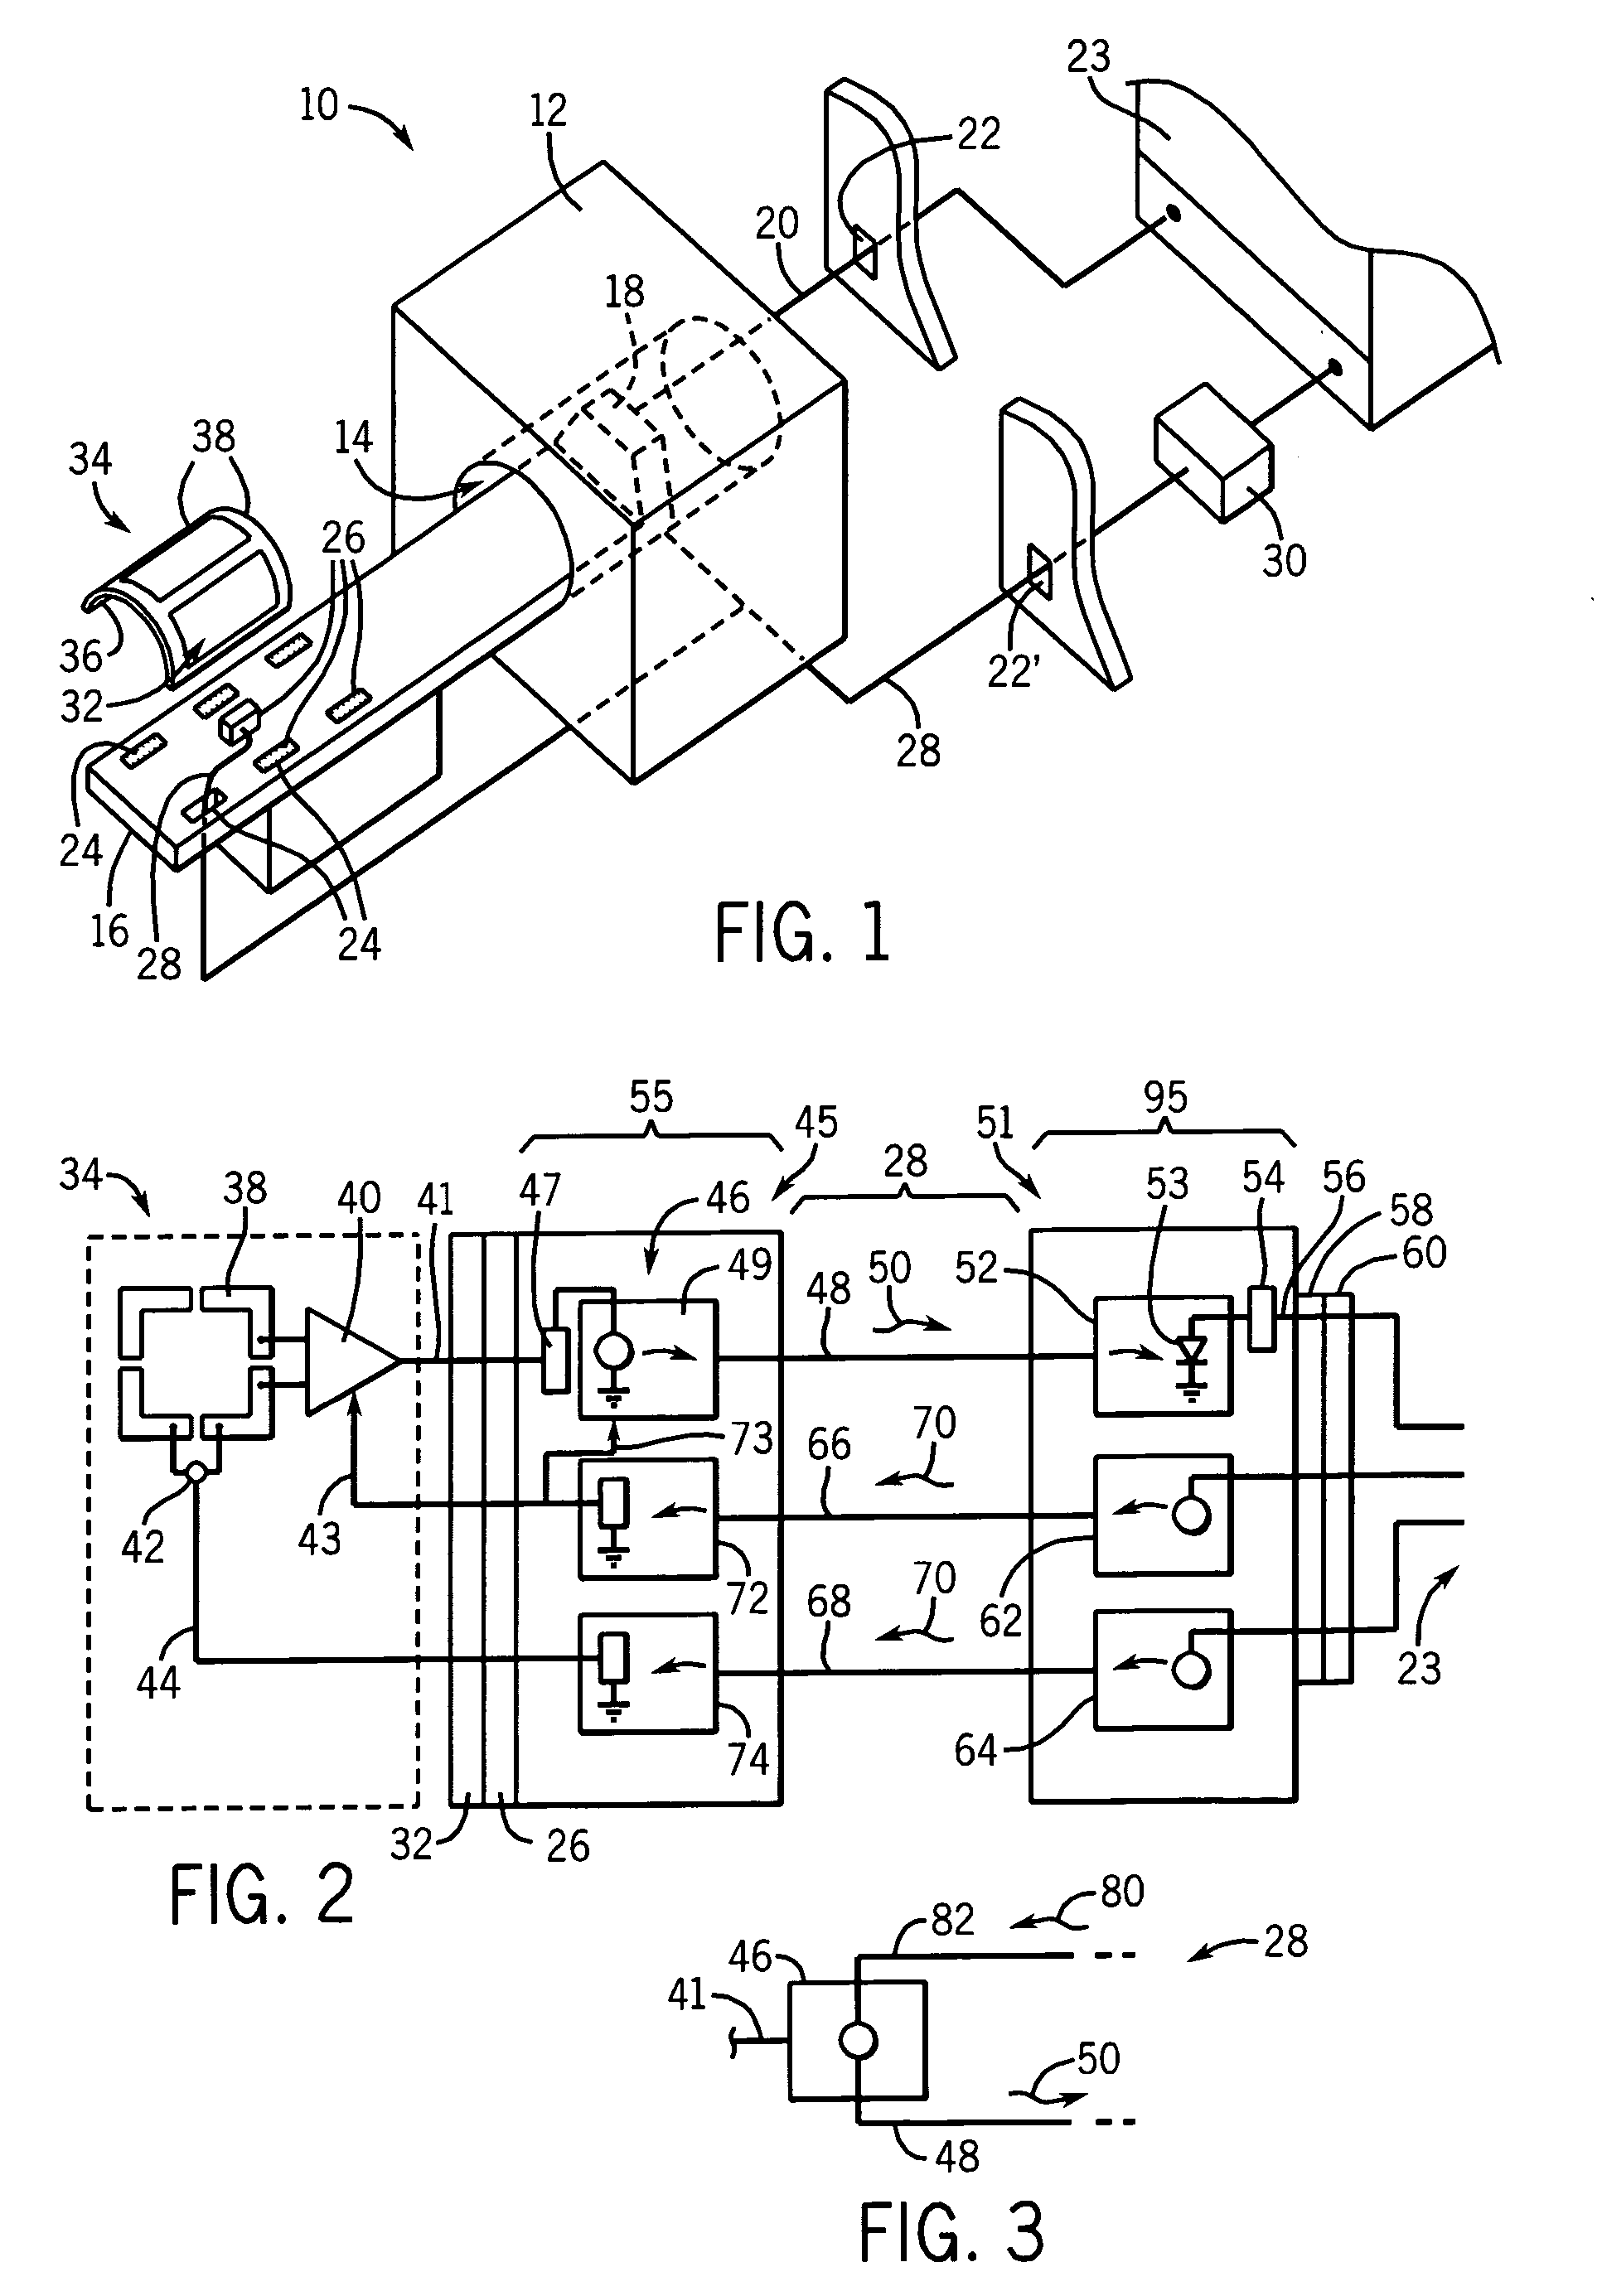 Optical interface for local MRI coils